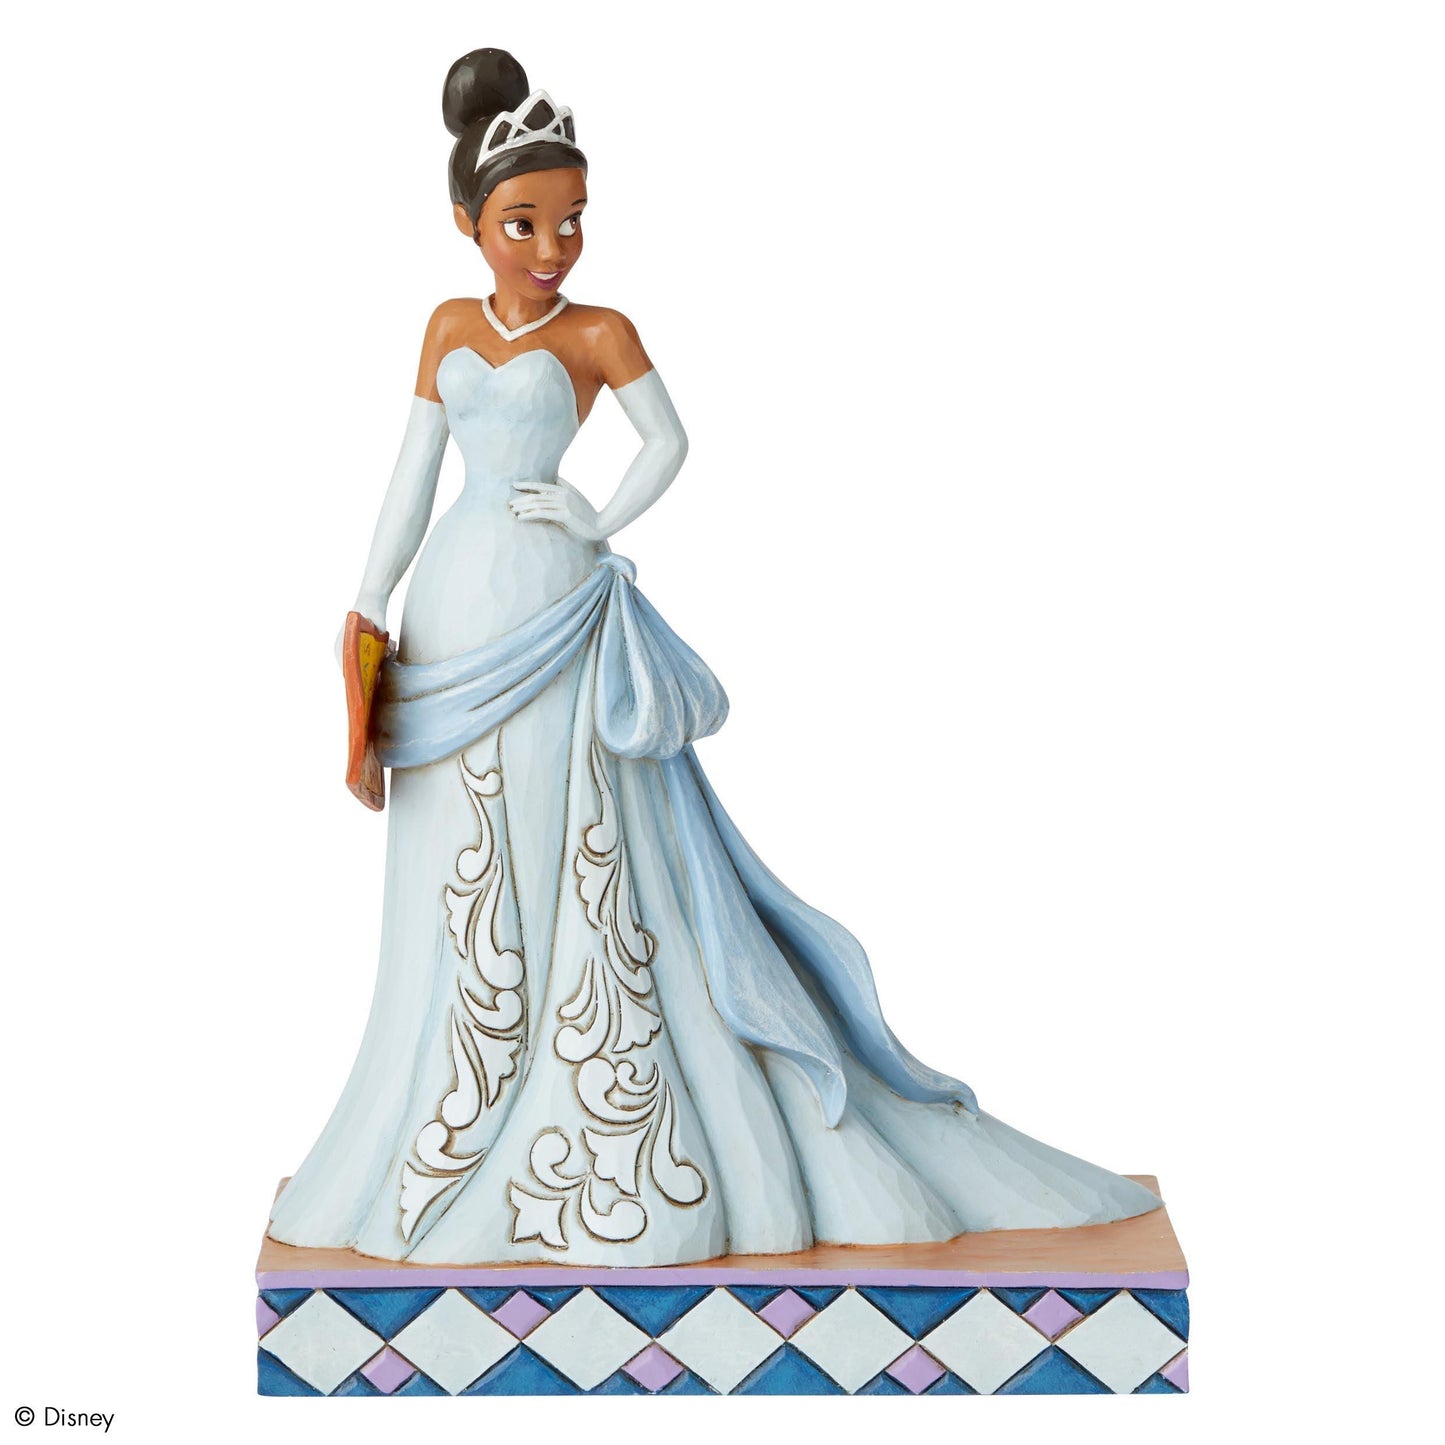 Enchanting Entrepreneur (Tiana Princess Passion Figurine) (Disney Traditions by Jim Shore) - Gallery Gifts Online 